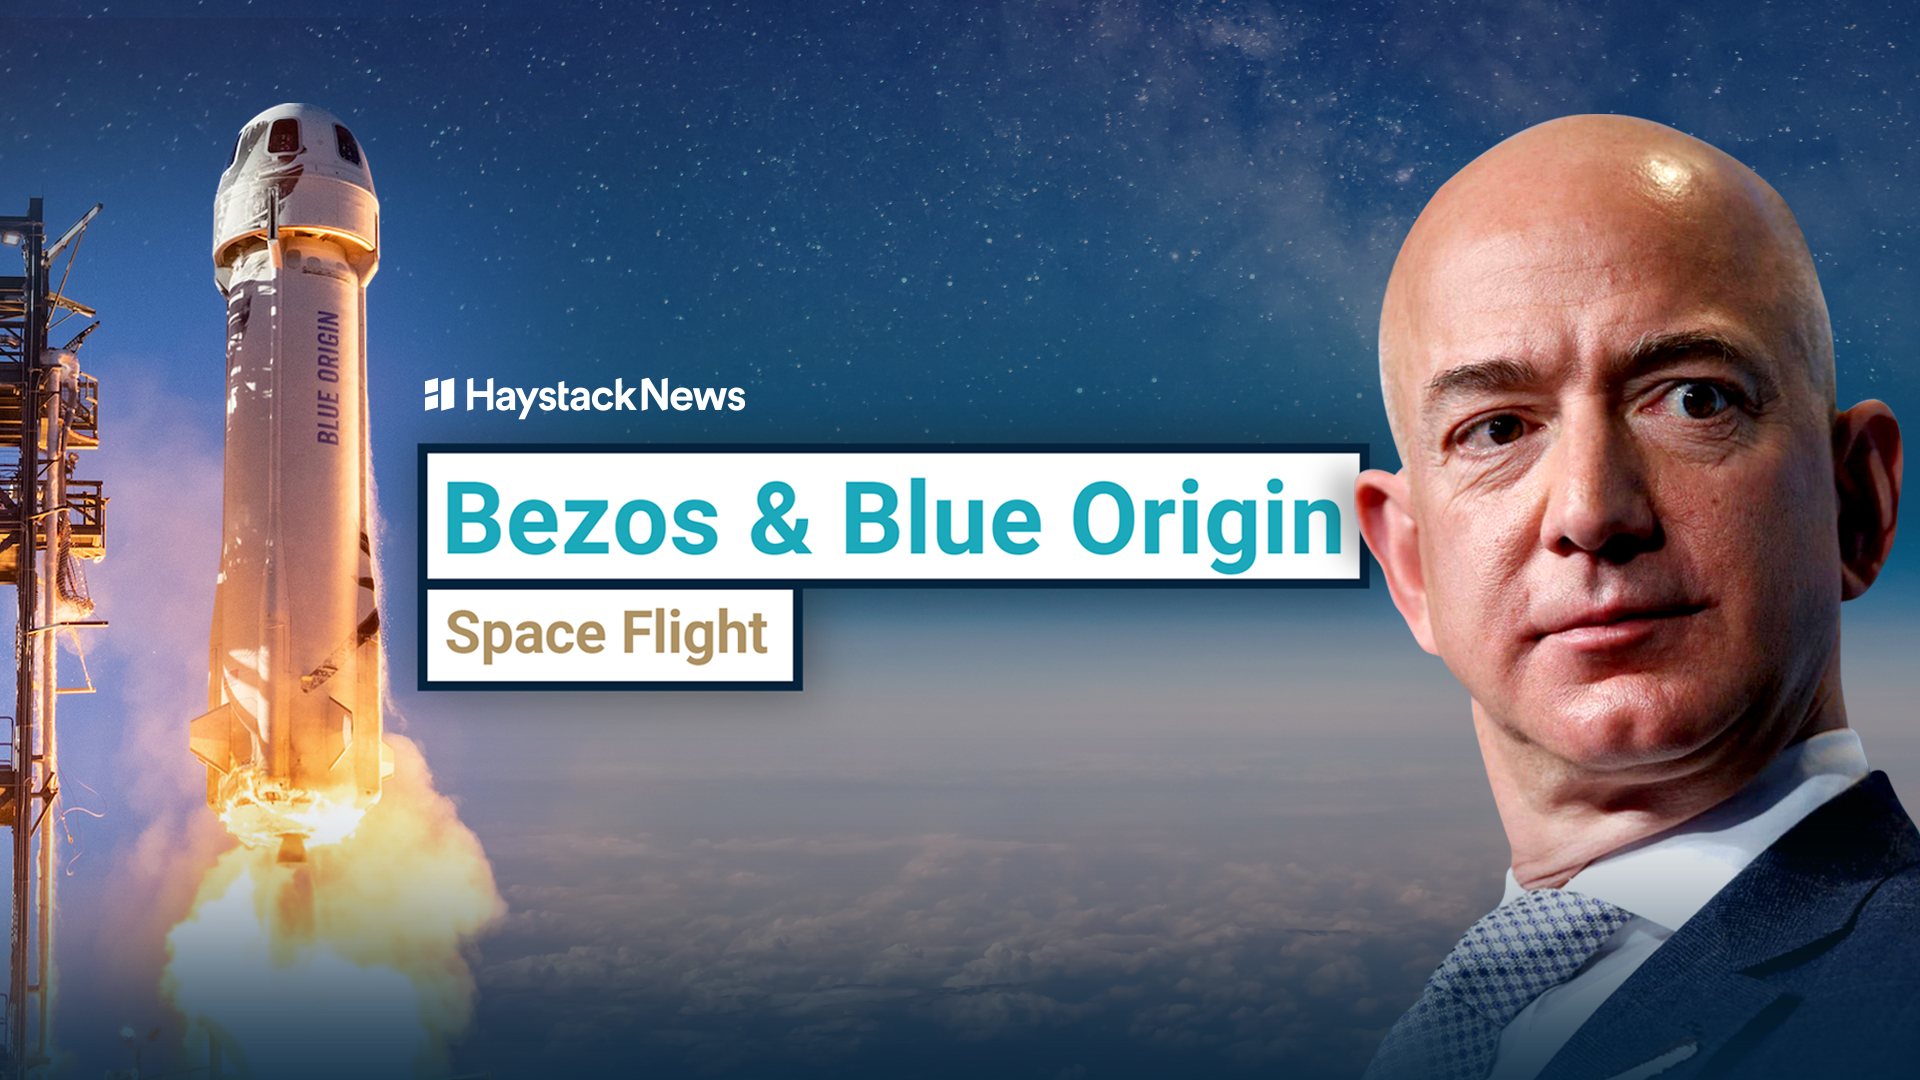 Haystack News Will Launch Channels for Olympics and Bezos’ Space Flight This Month